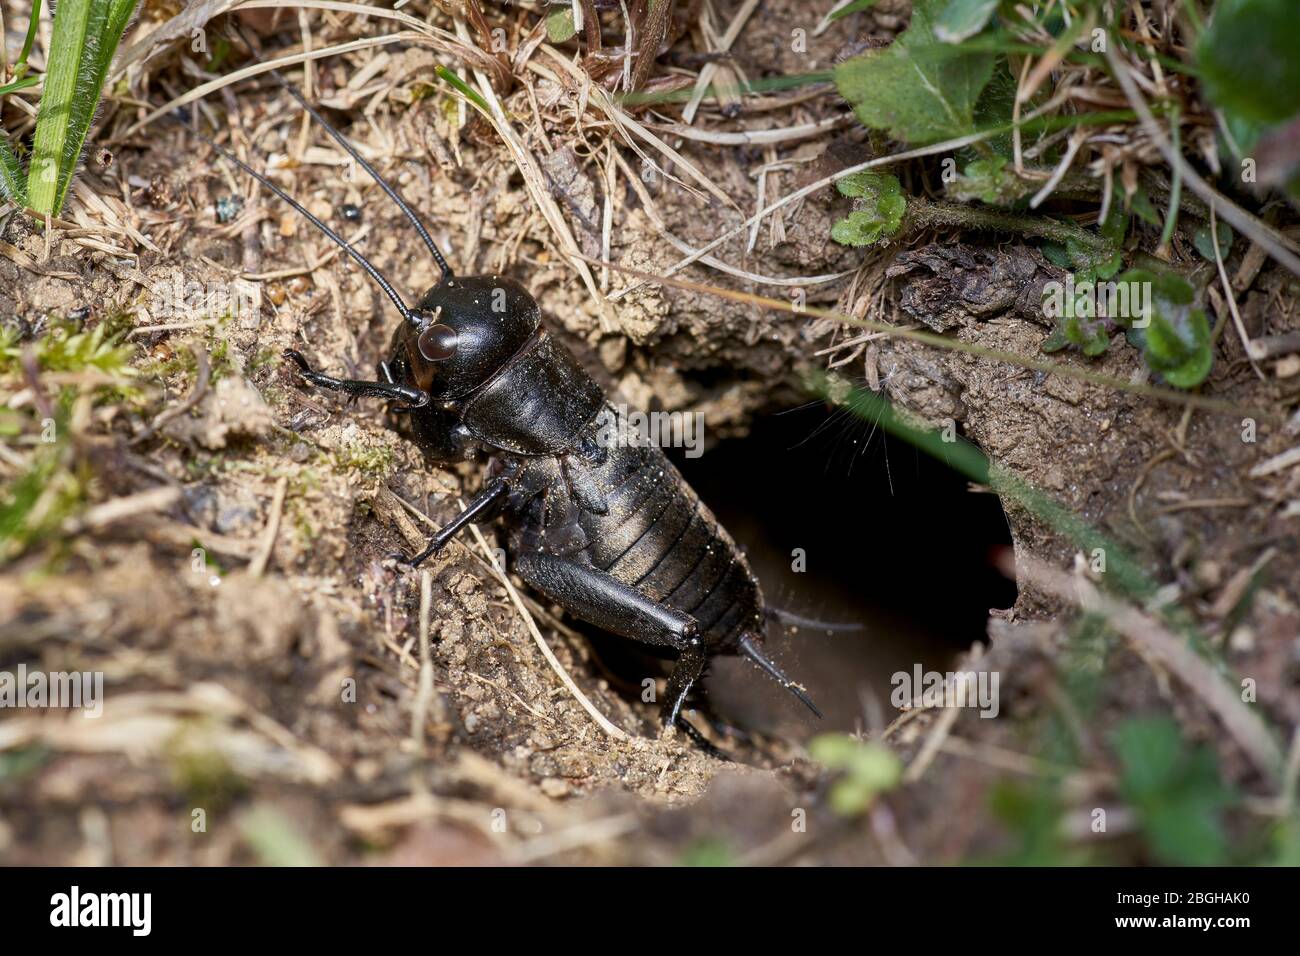 black field cricket in front / outside of the burrow Stock Photo